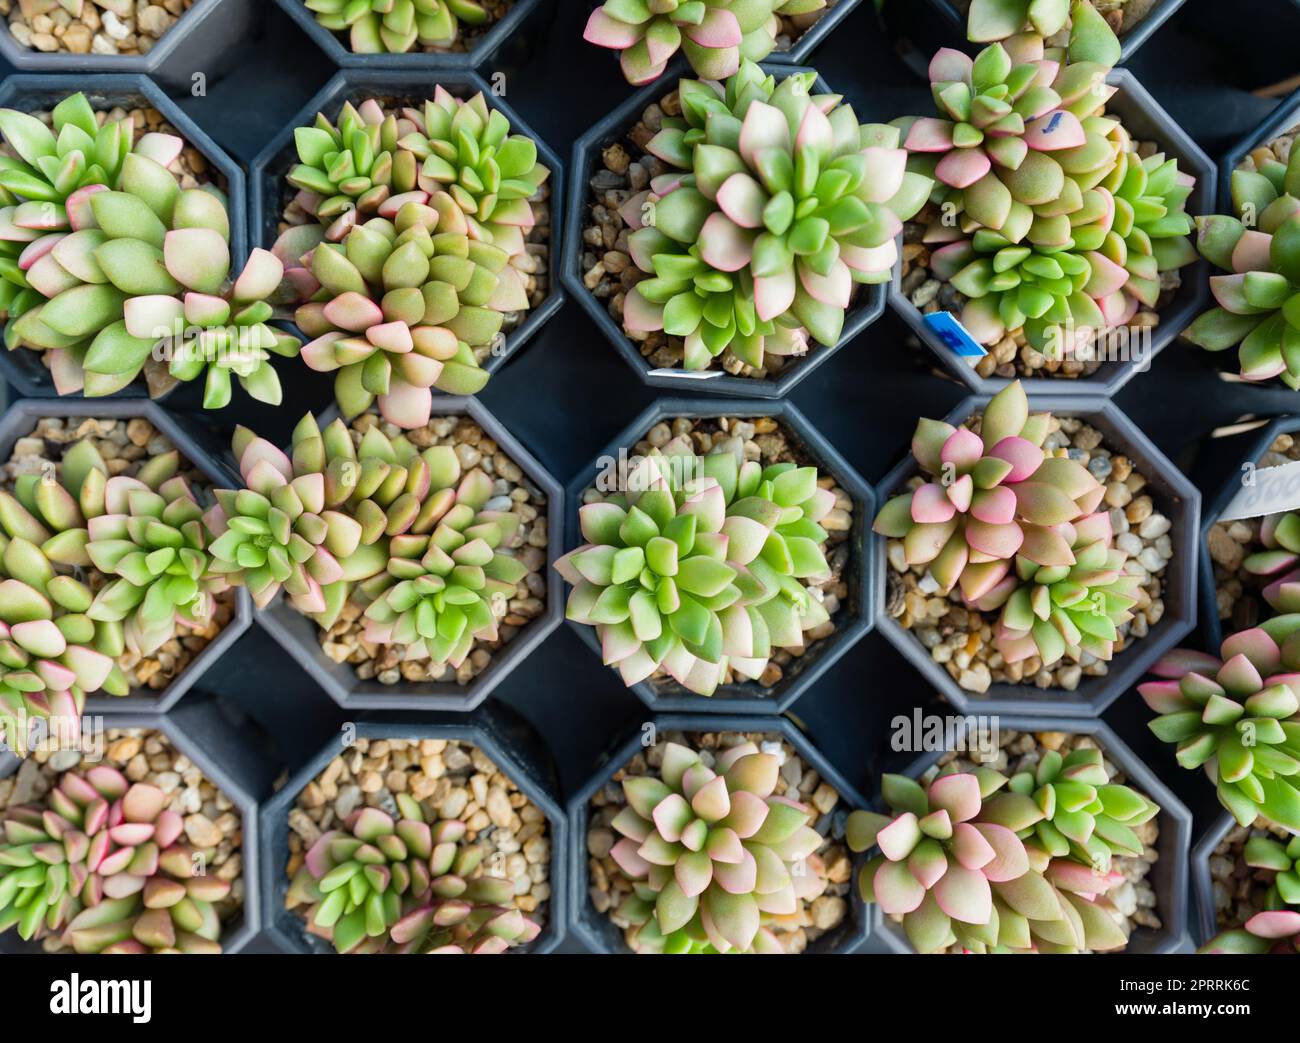 Echeveria Pink Ruby, Succulents plant cultivating in the nursery. Top View. Stock Photo